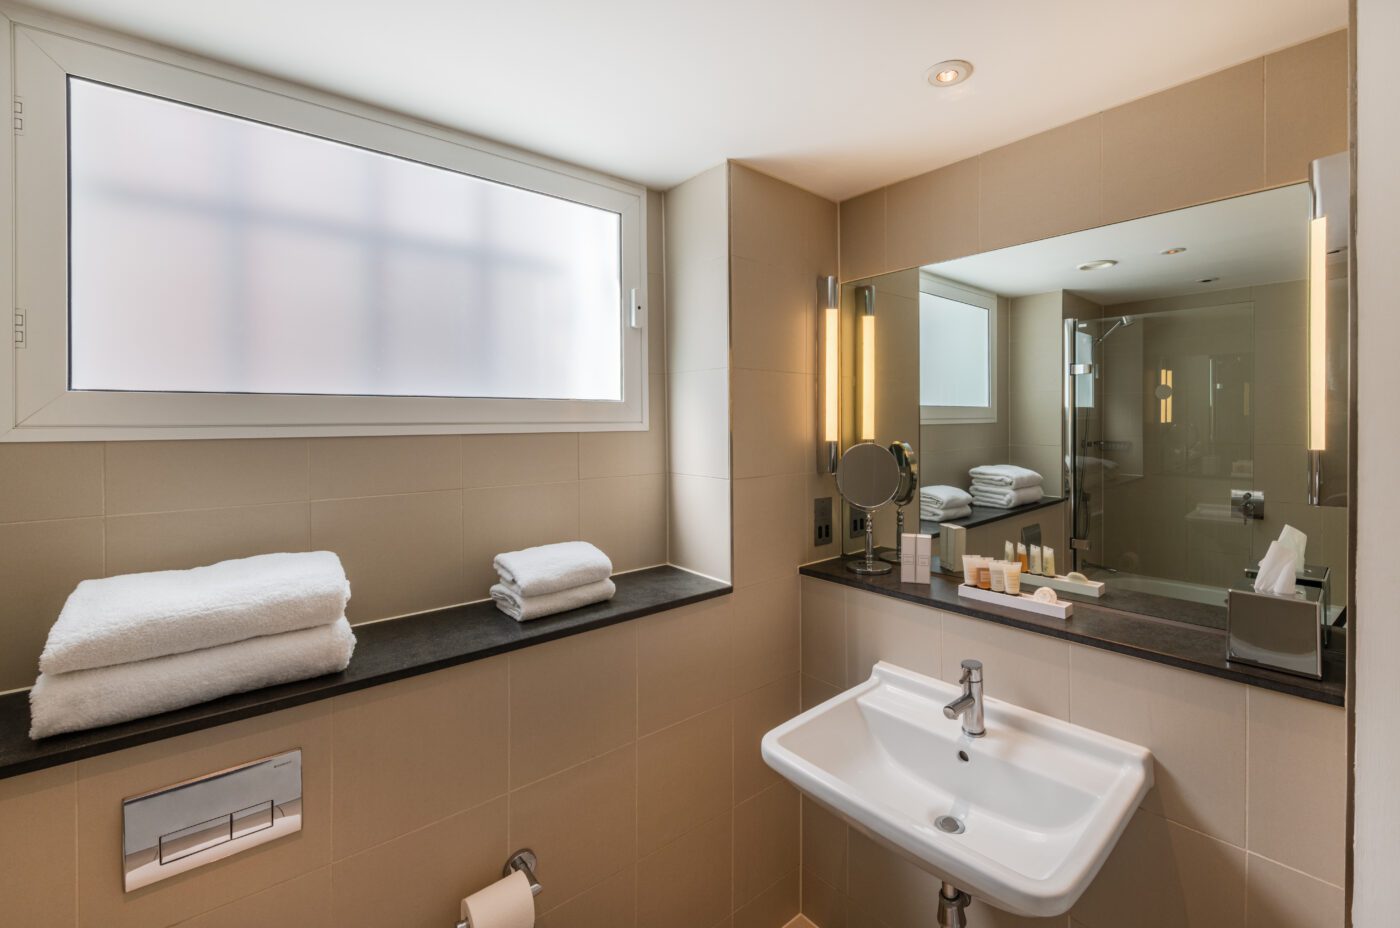 A junior suite bathroom, with shelves and amenities.